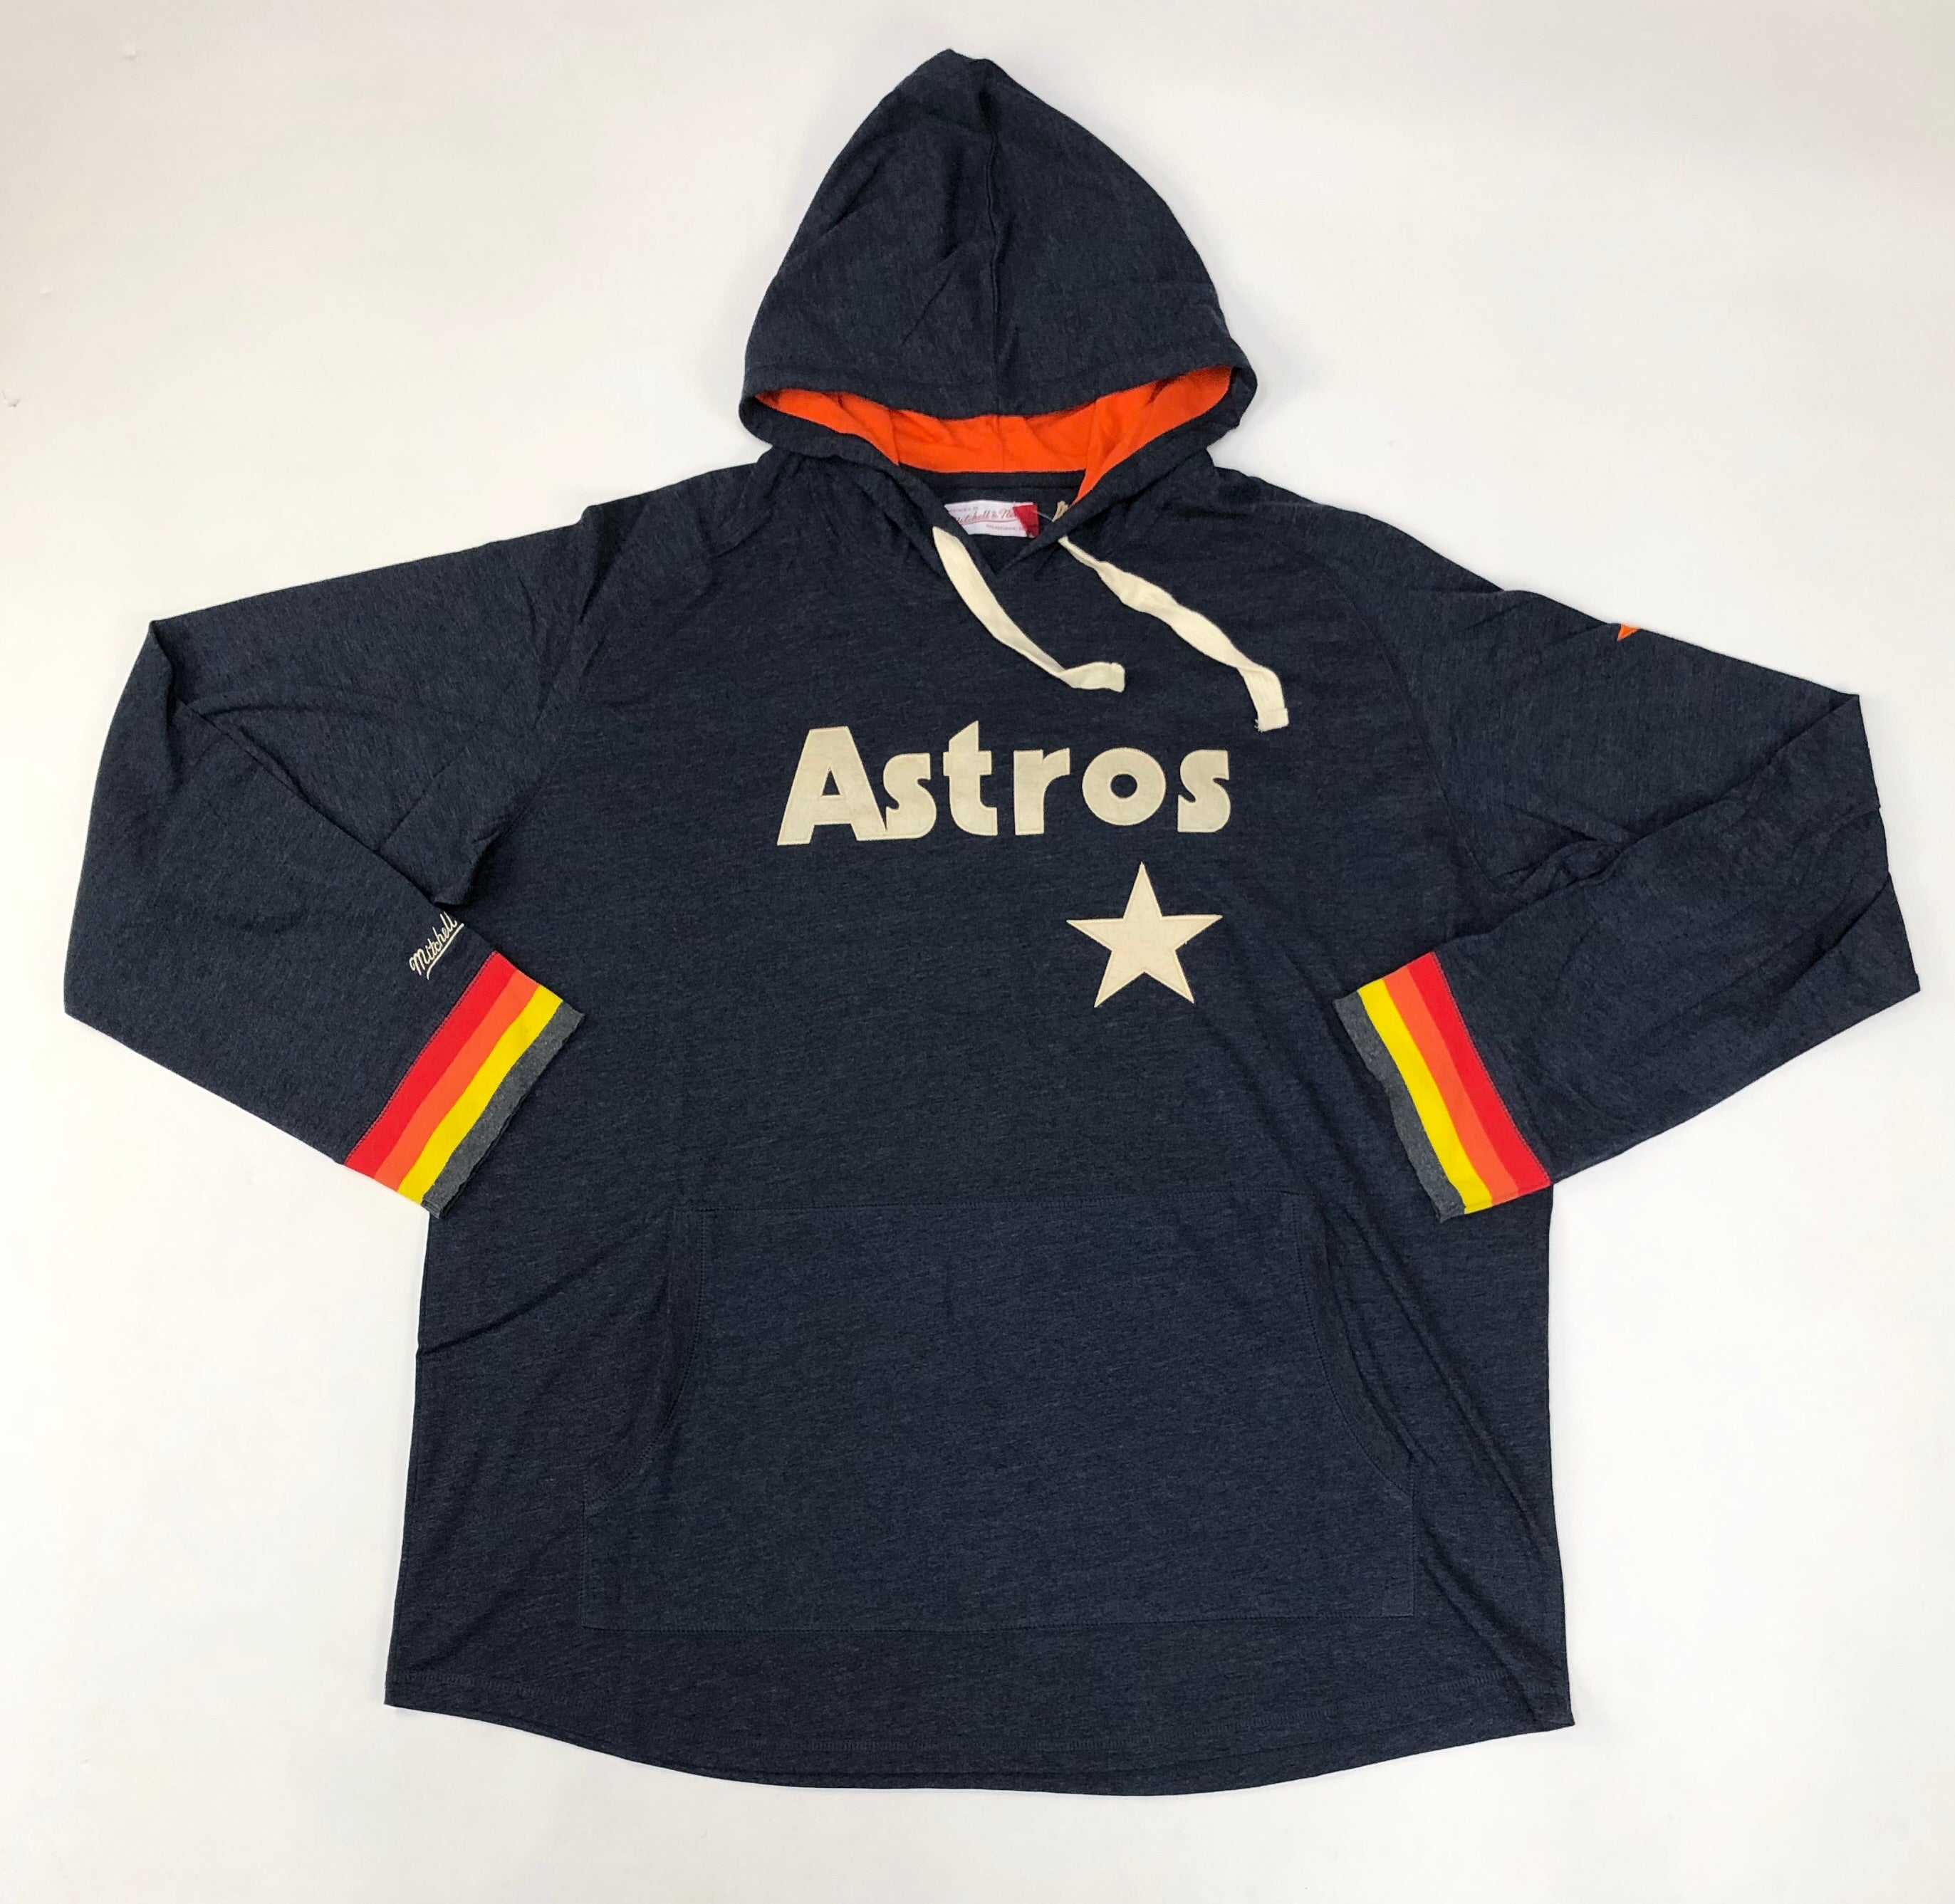 MITCHELL AND NESS MN1005HD-ASTROS